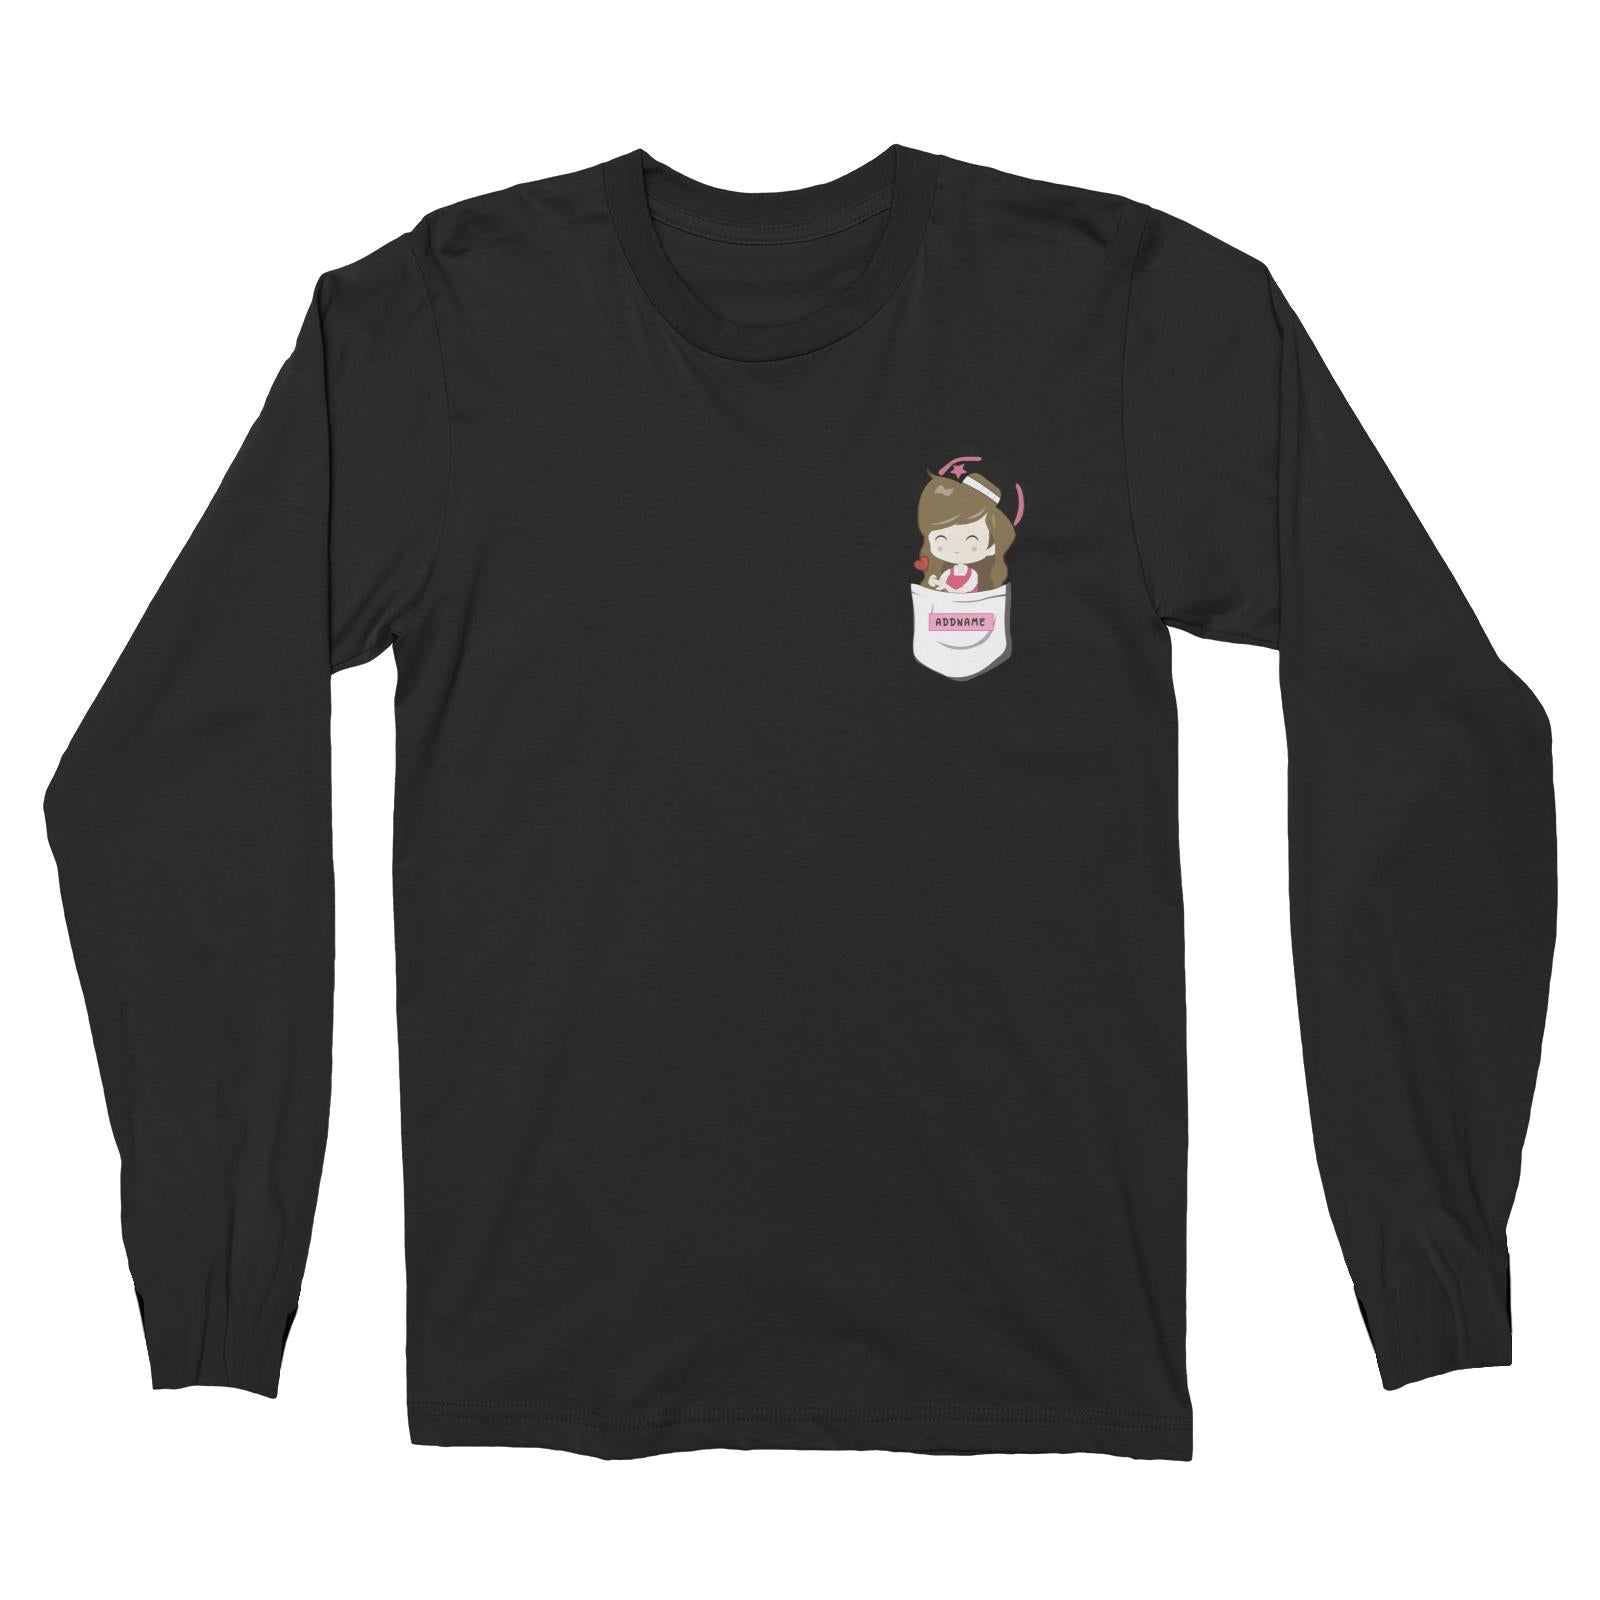 My Lovely Family Series Pocket Size Mommy Addname Long Sleeve Unisex T-Shirt